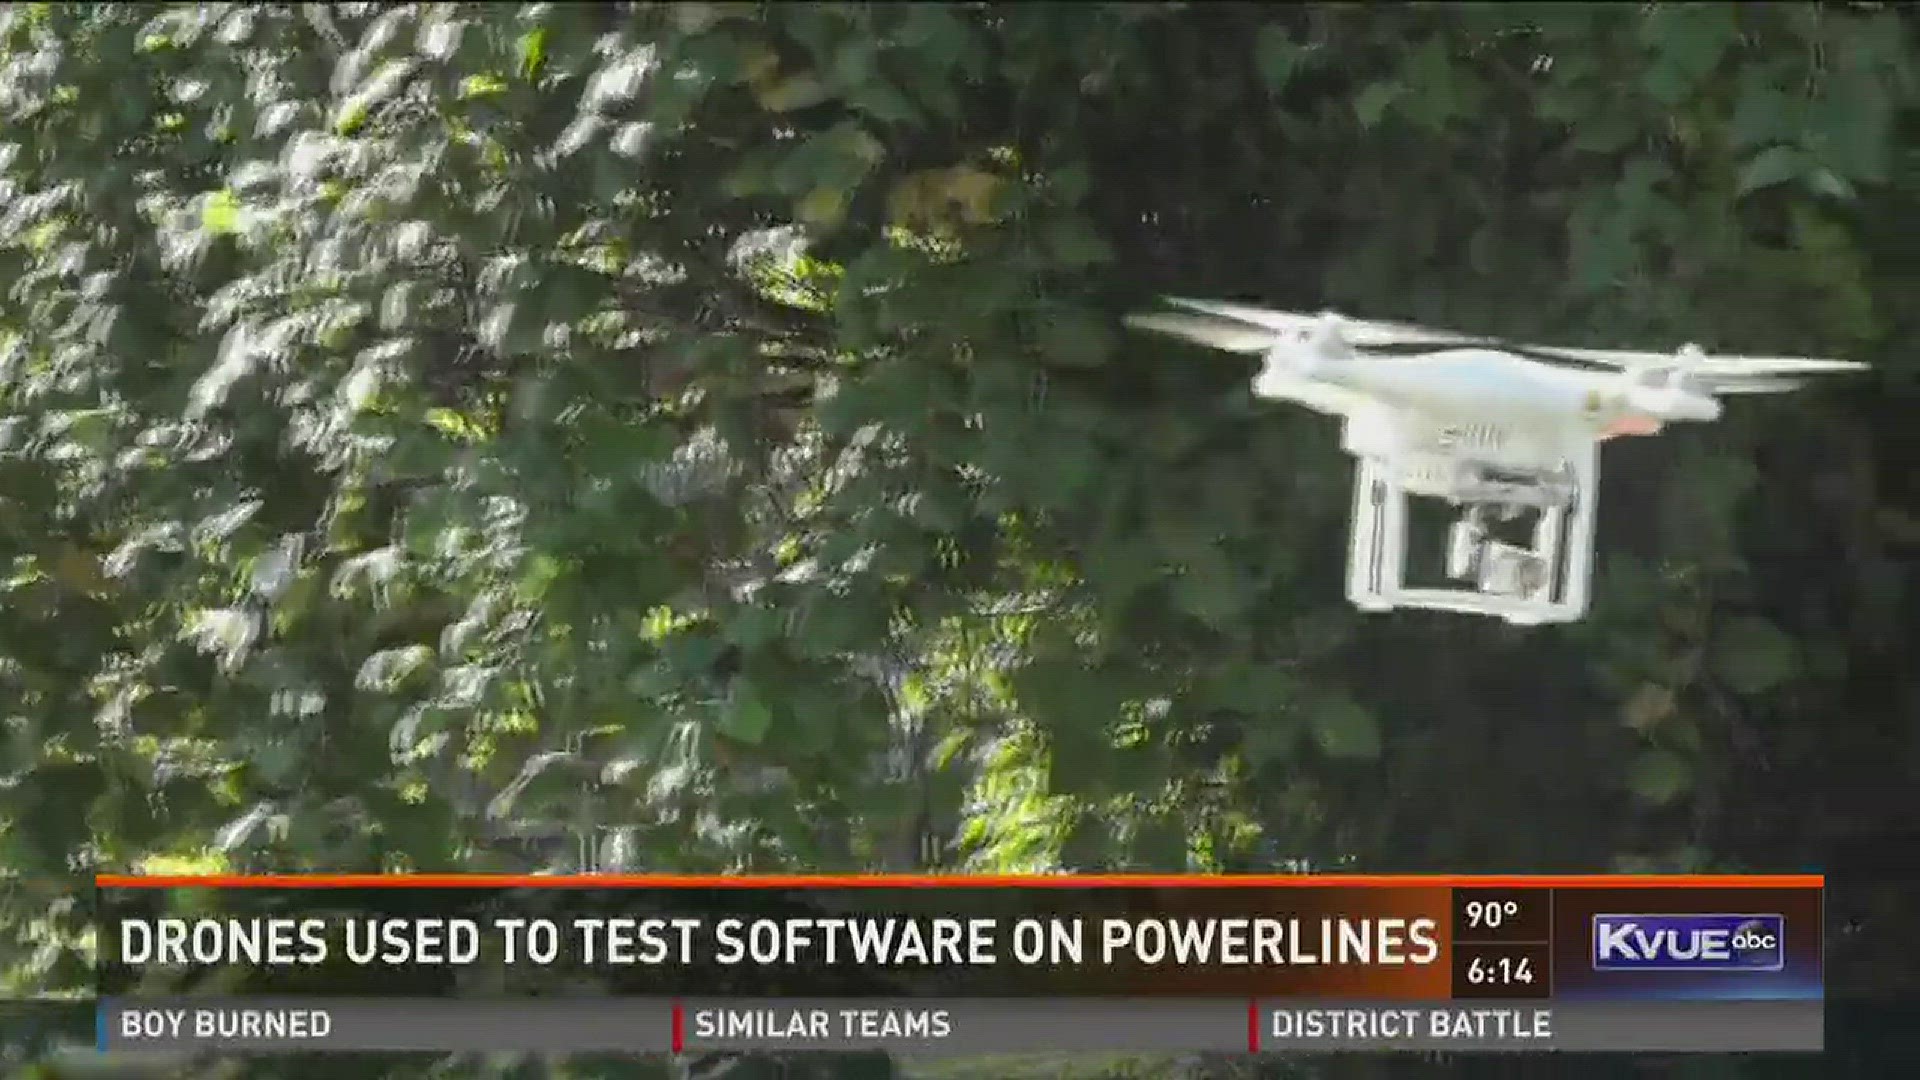 Drones used to test software on power lines